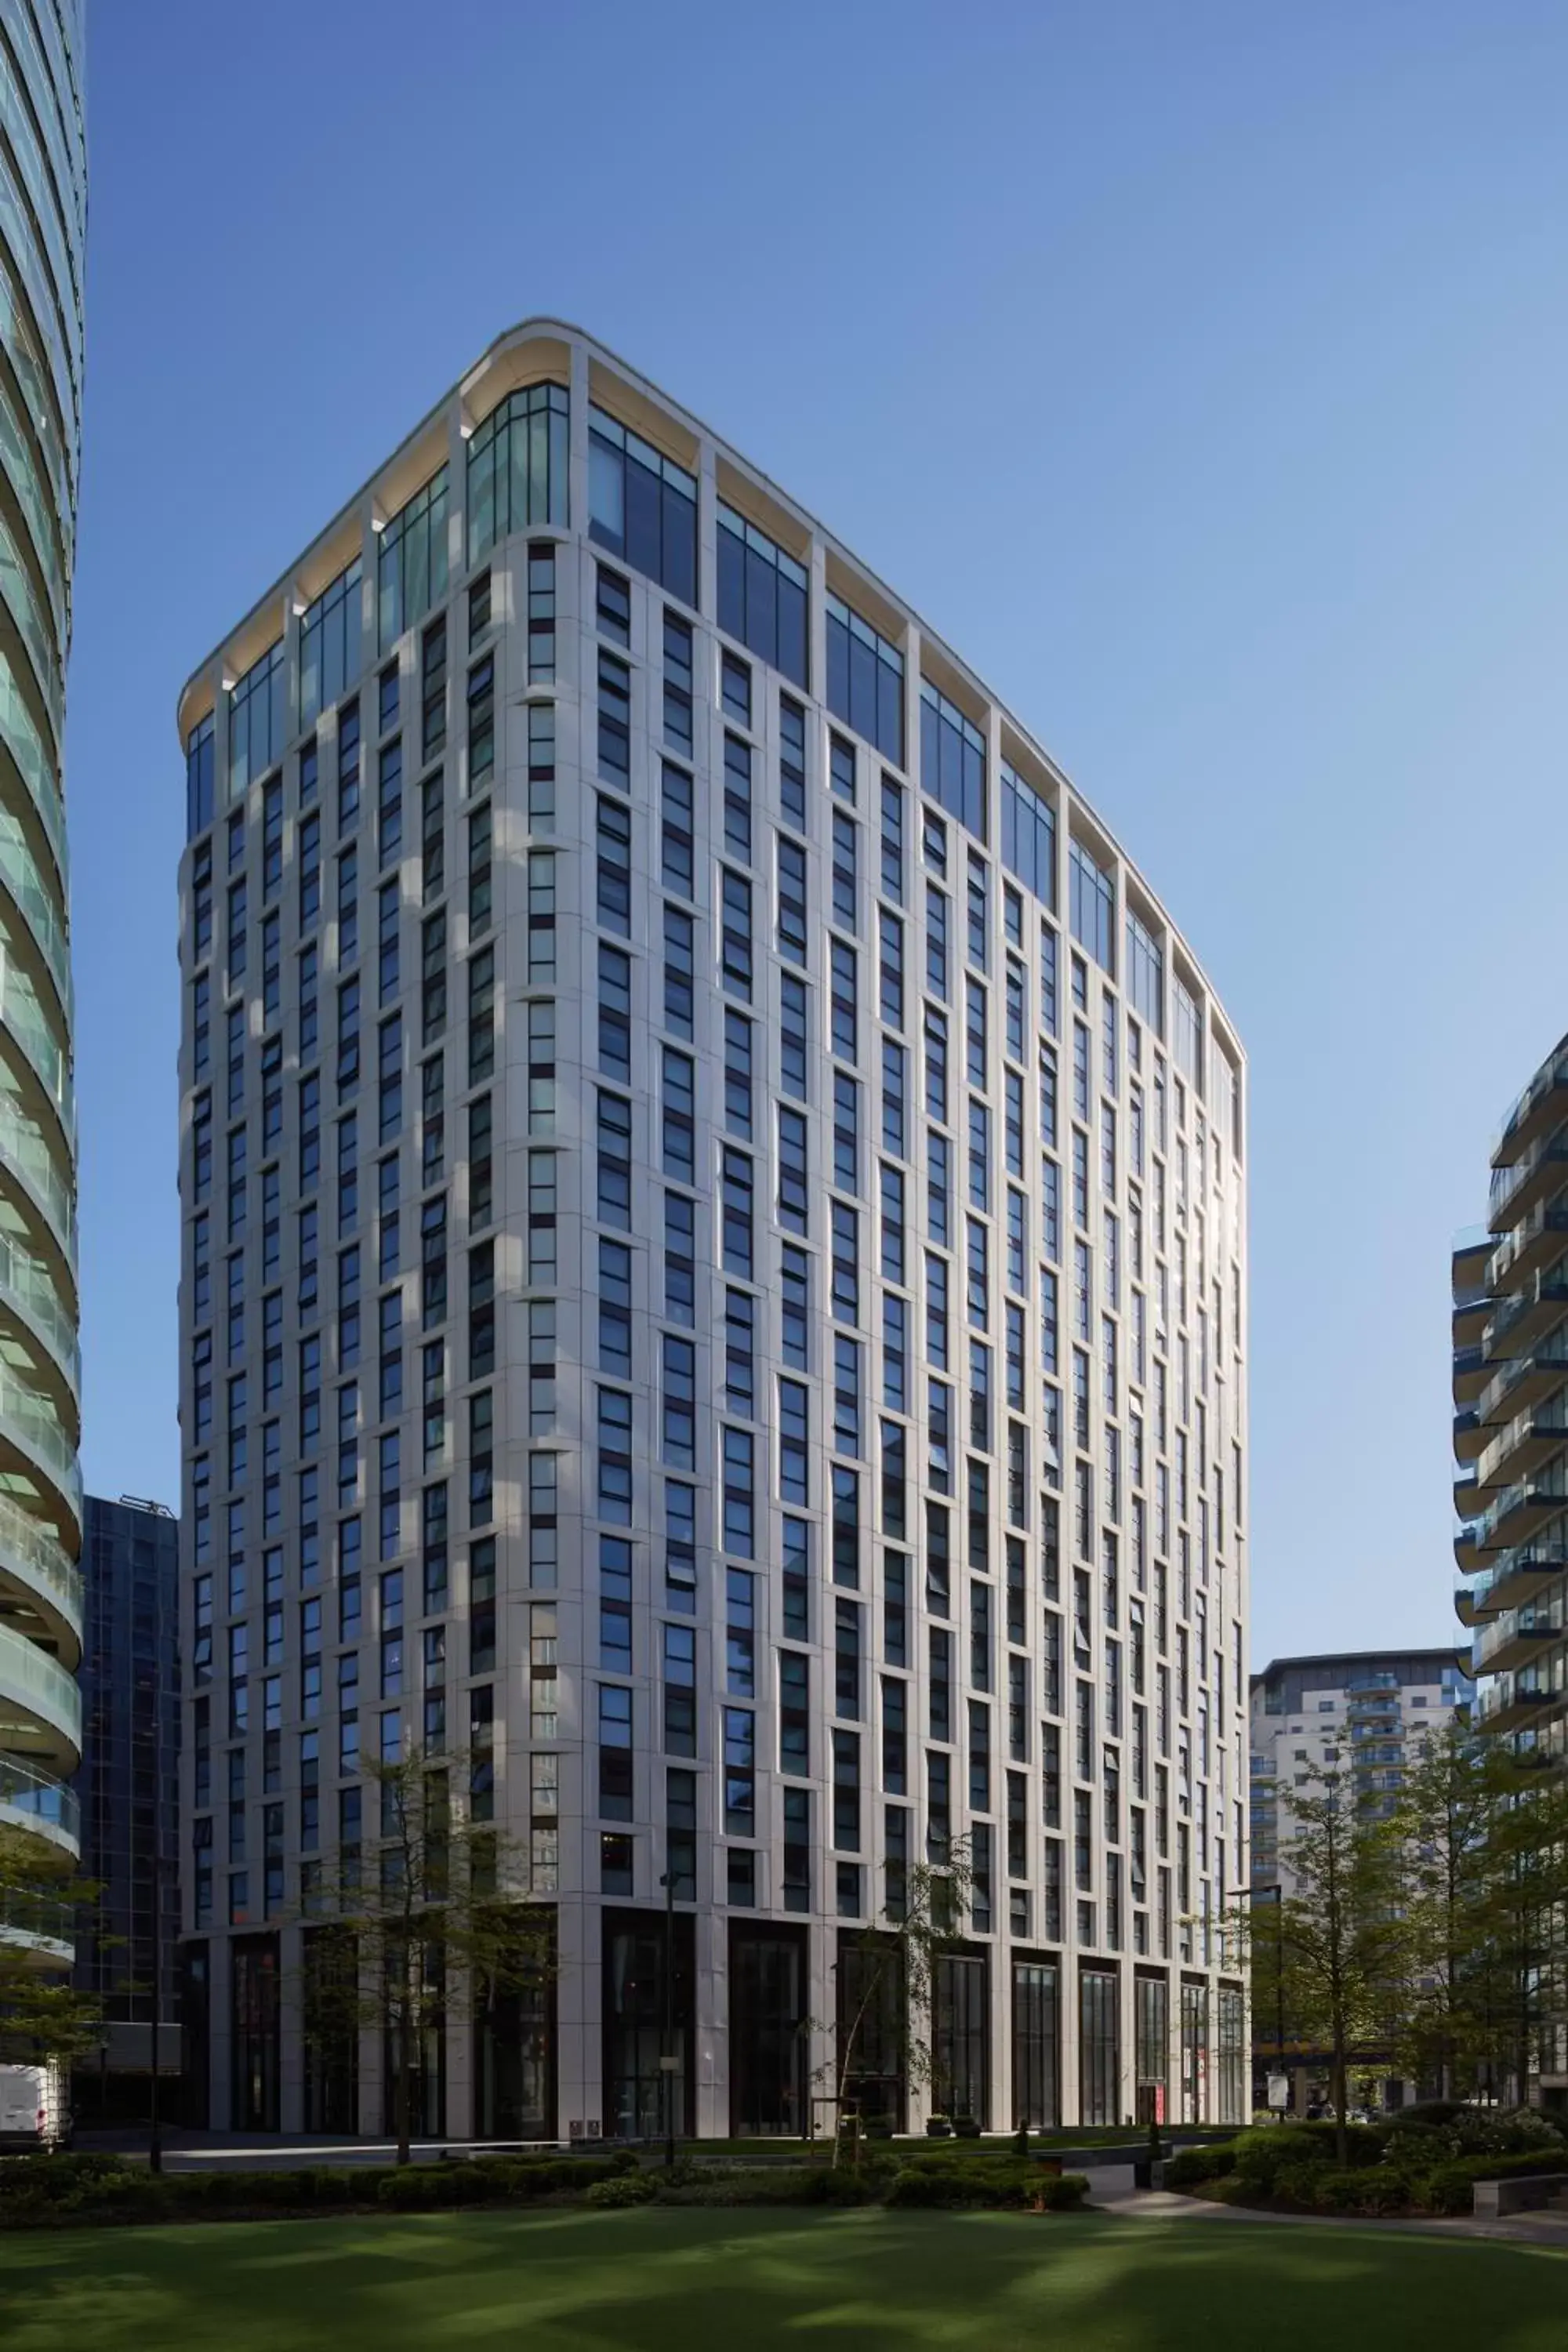 Property building in The Collective Canary Wharf